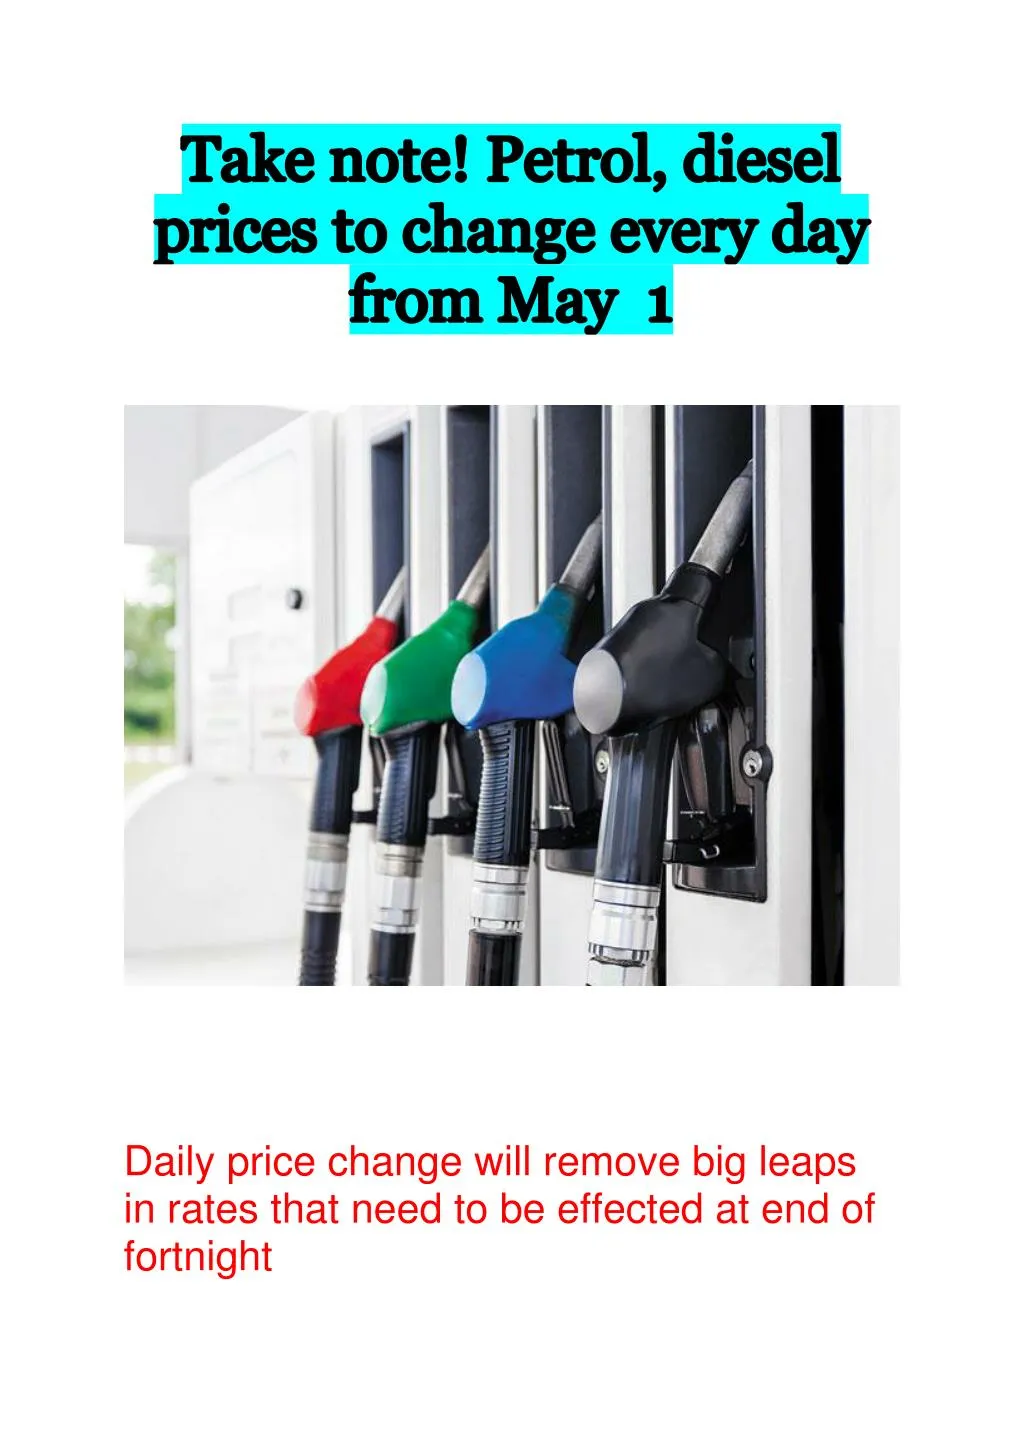 daily price change will remove big leaps in rates